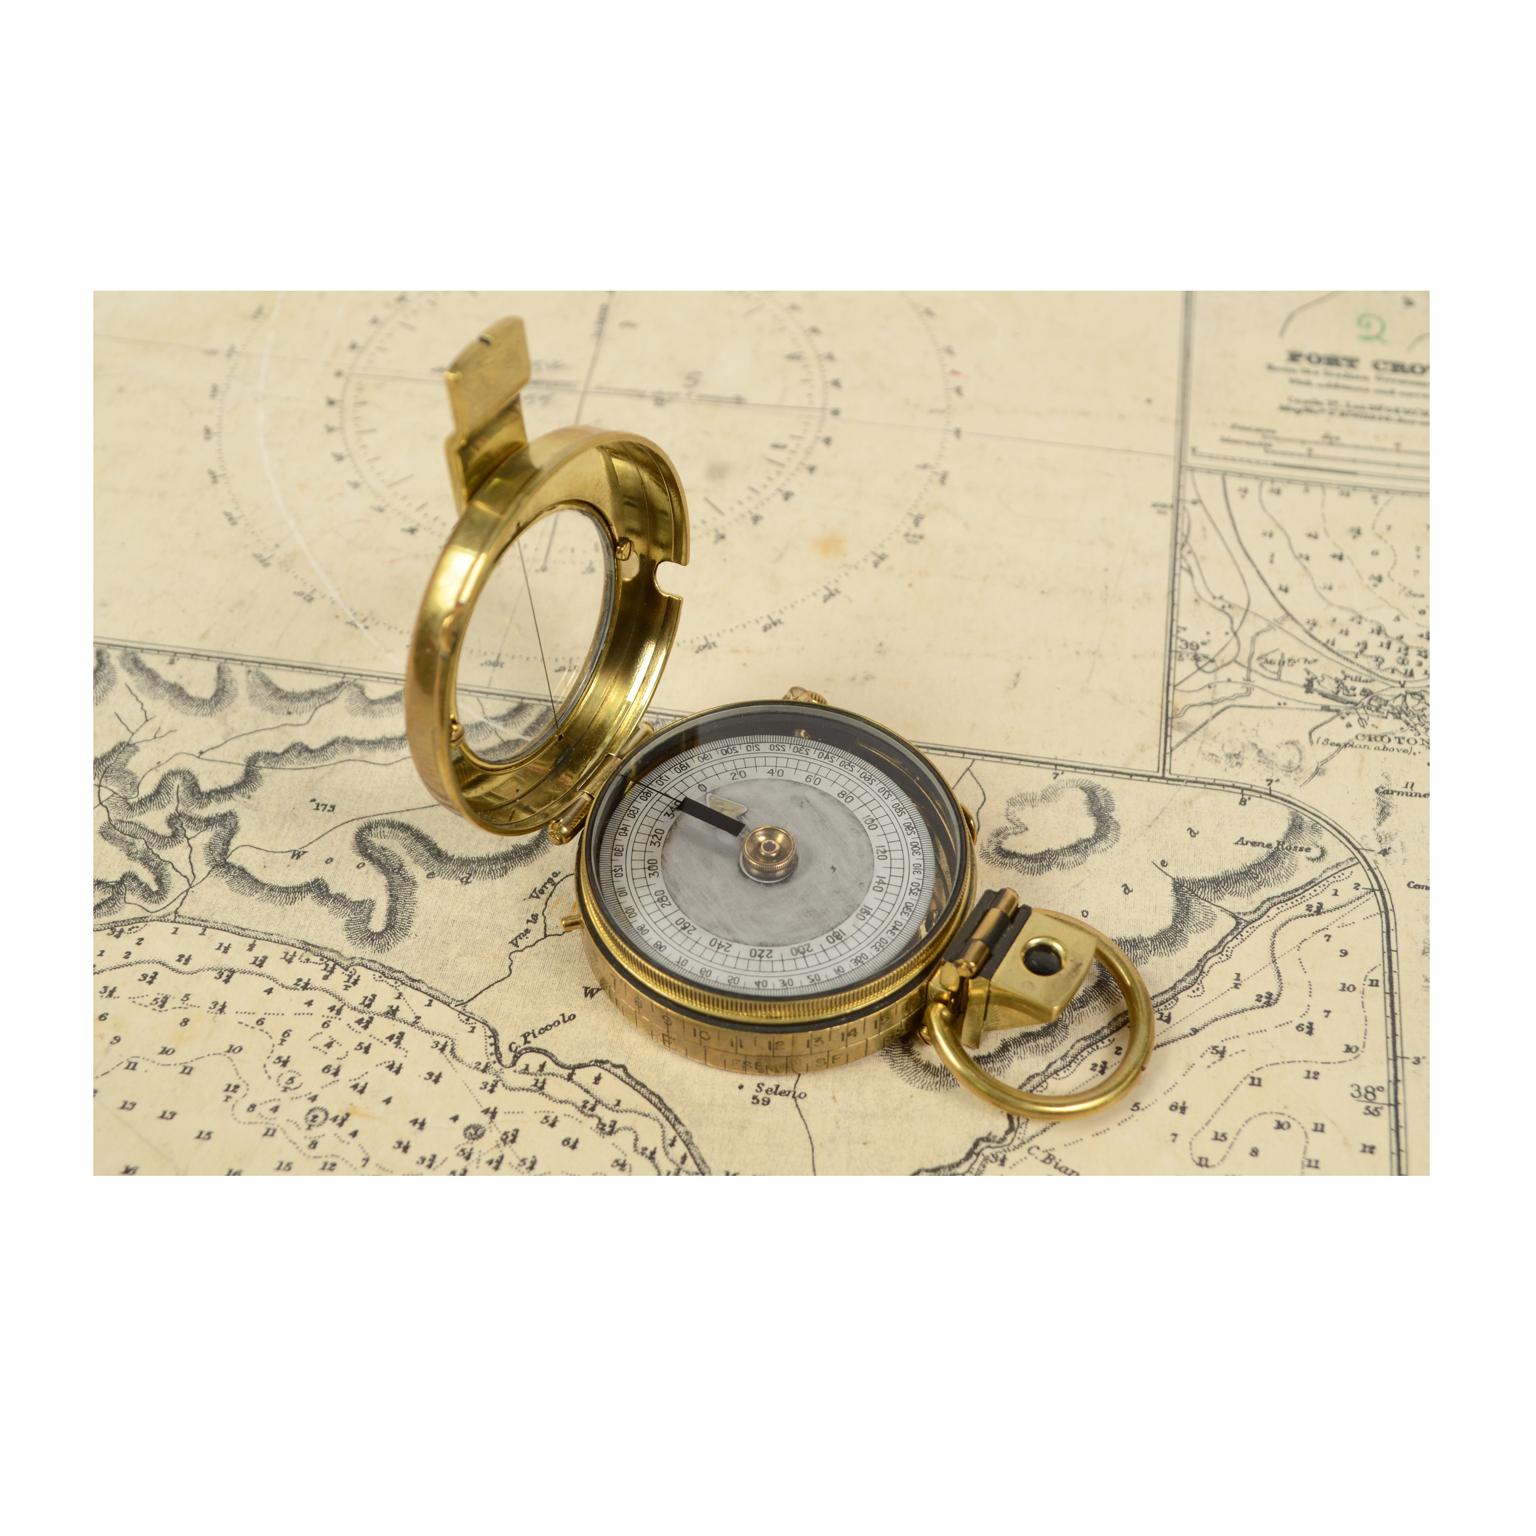 Brass prismatic bearing compass; it is a small compass, Verner’s Pattern model produced in 1918 and supplied to English officers, typically used in navigation. It can also be held in the hand and therefore far from magnetic fields. It is equipped